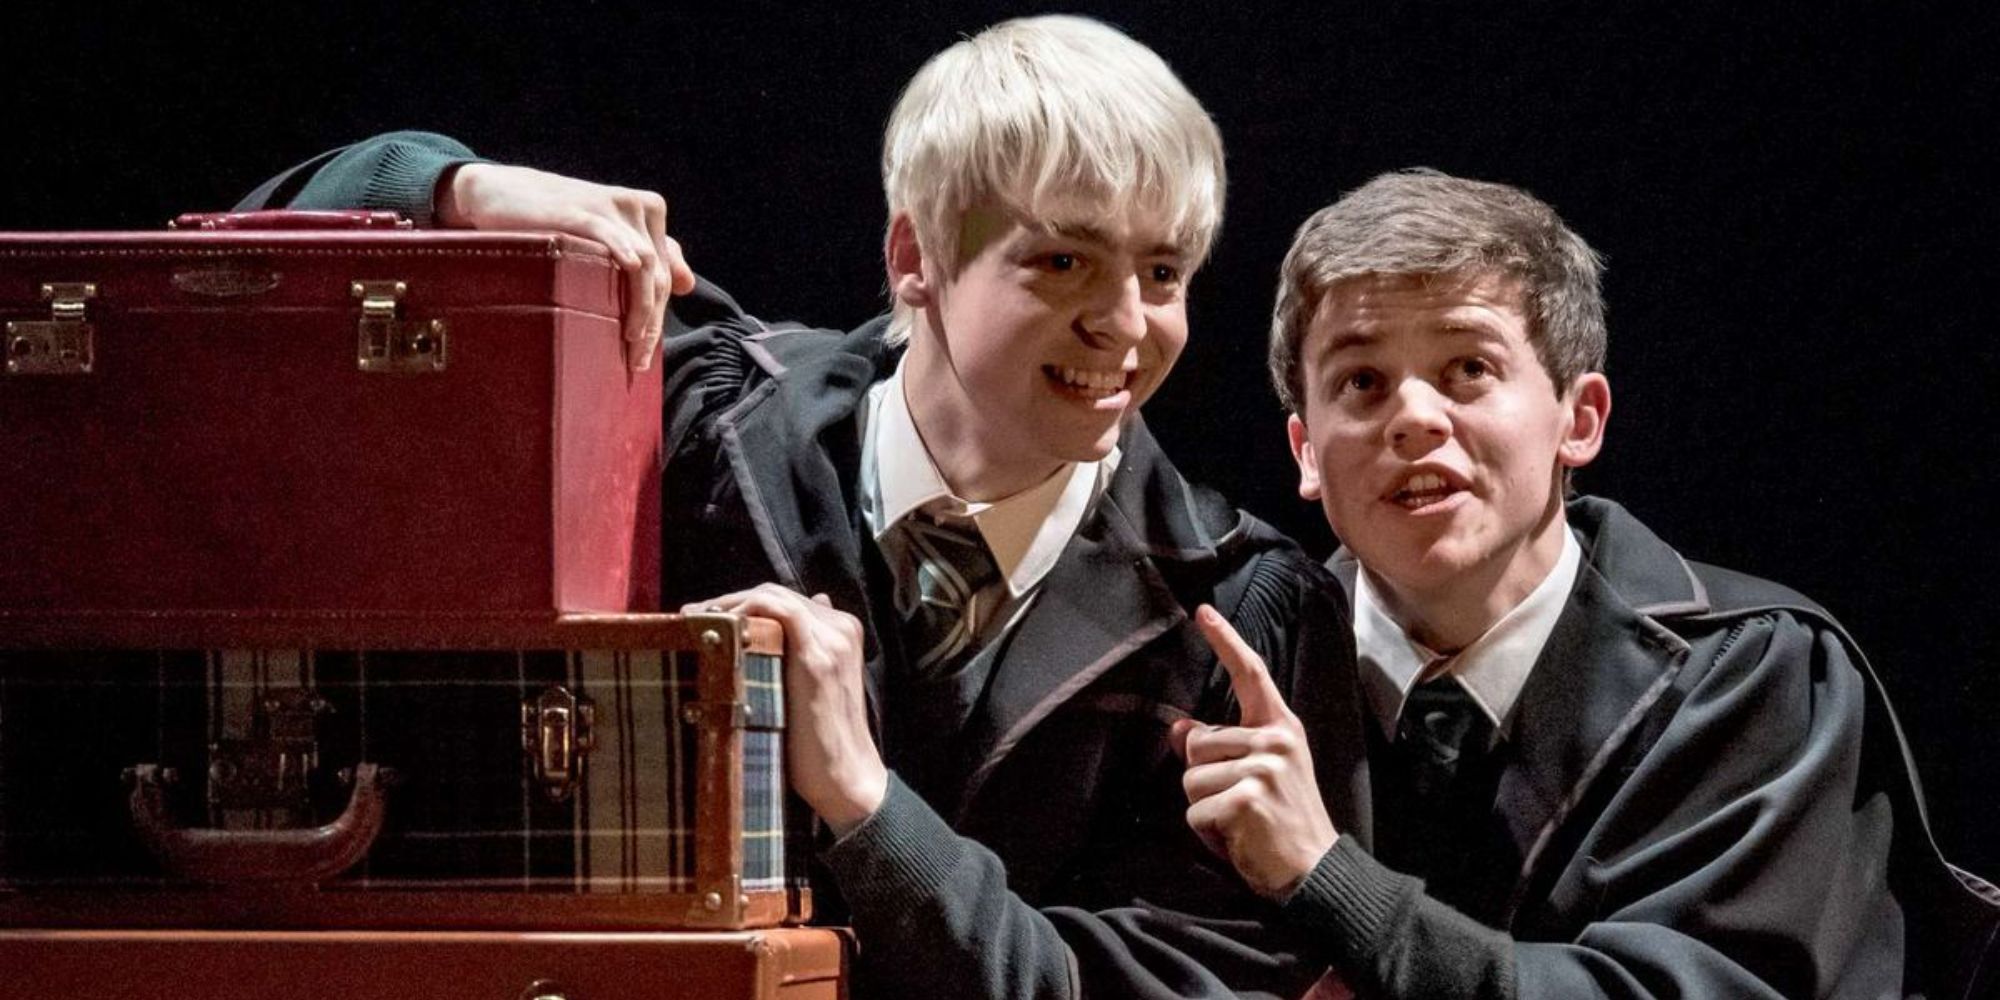 Albus Potter and Scorpius Malfoy crouch by some luggage